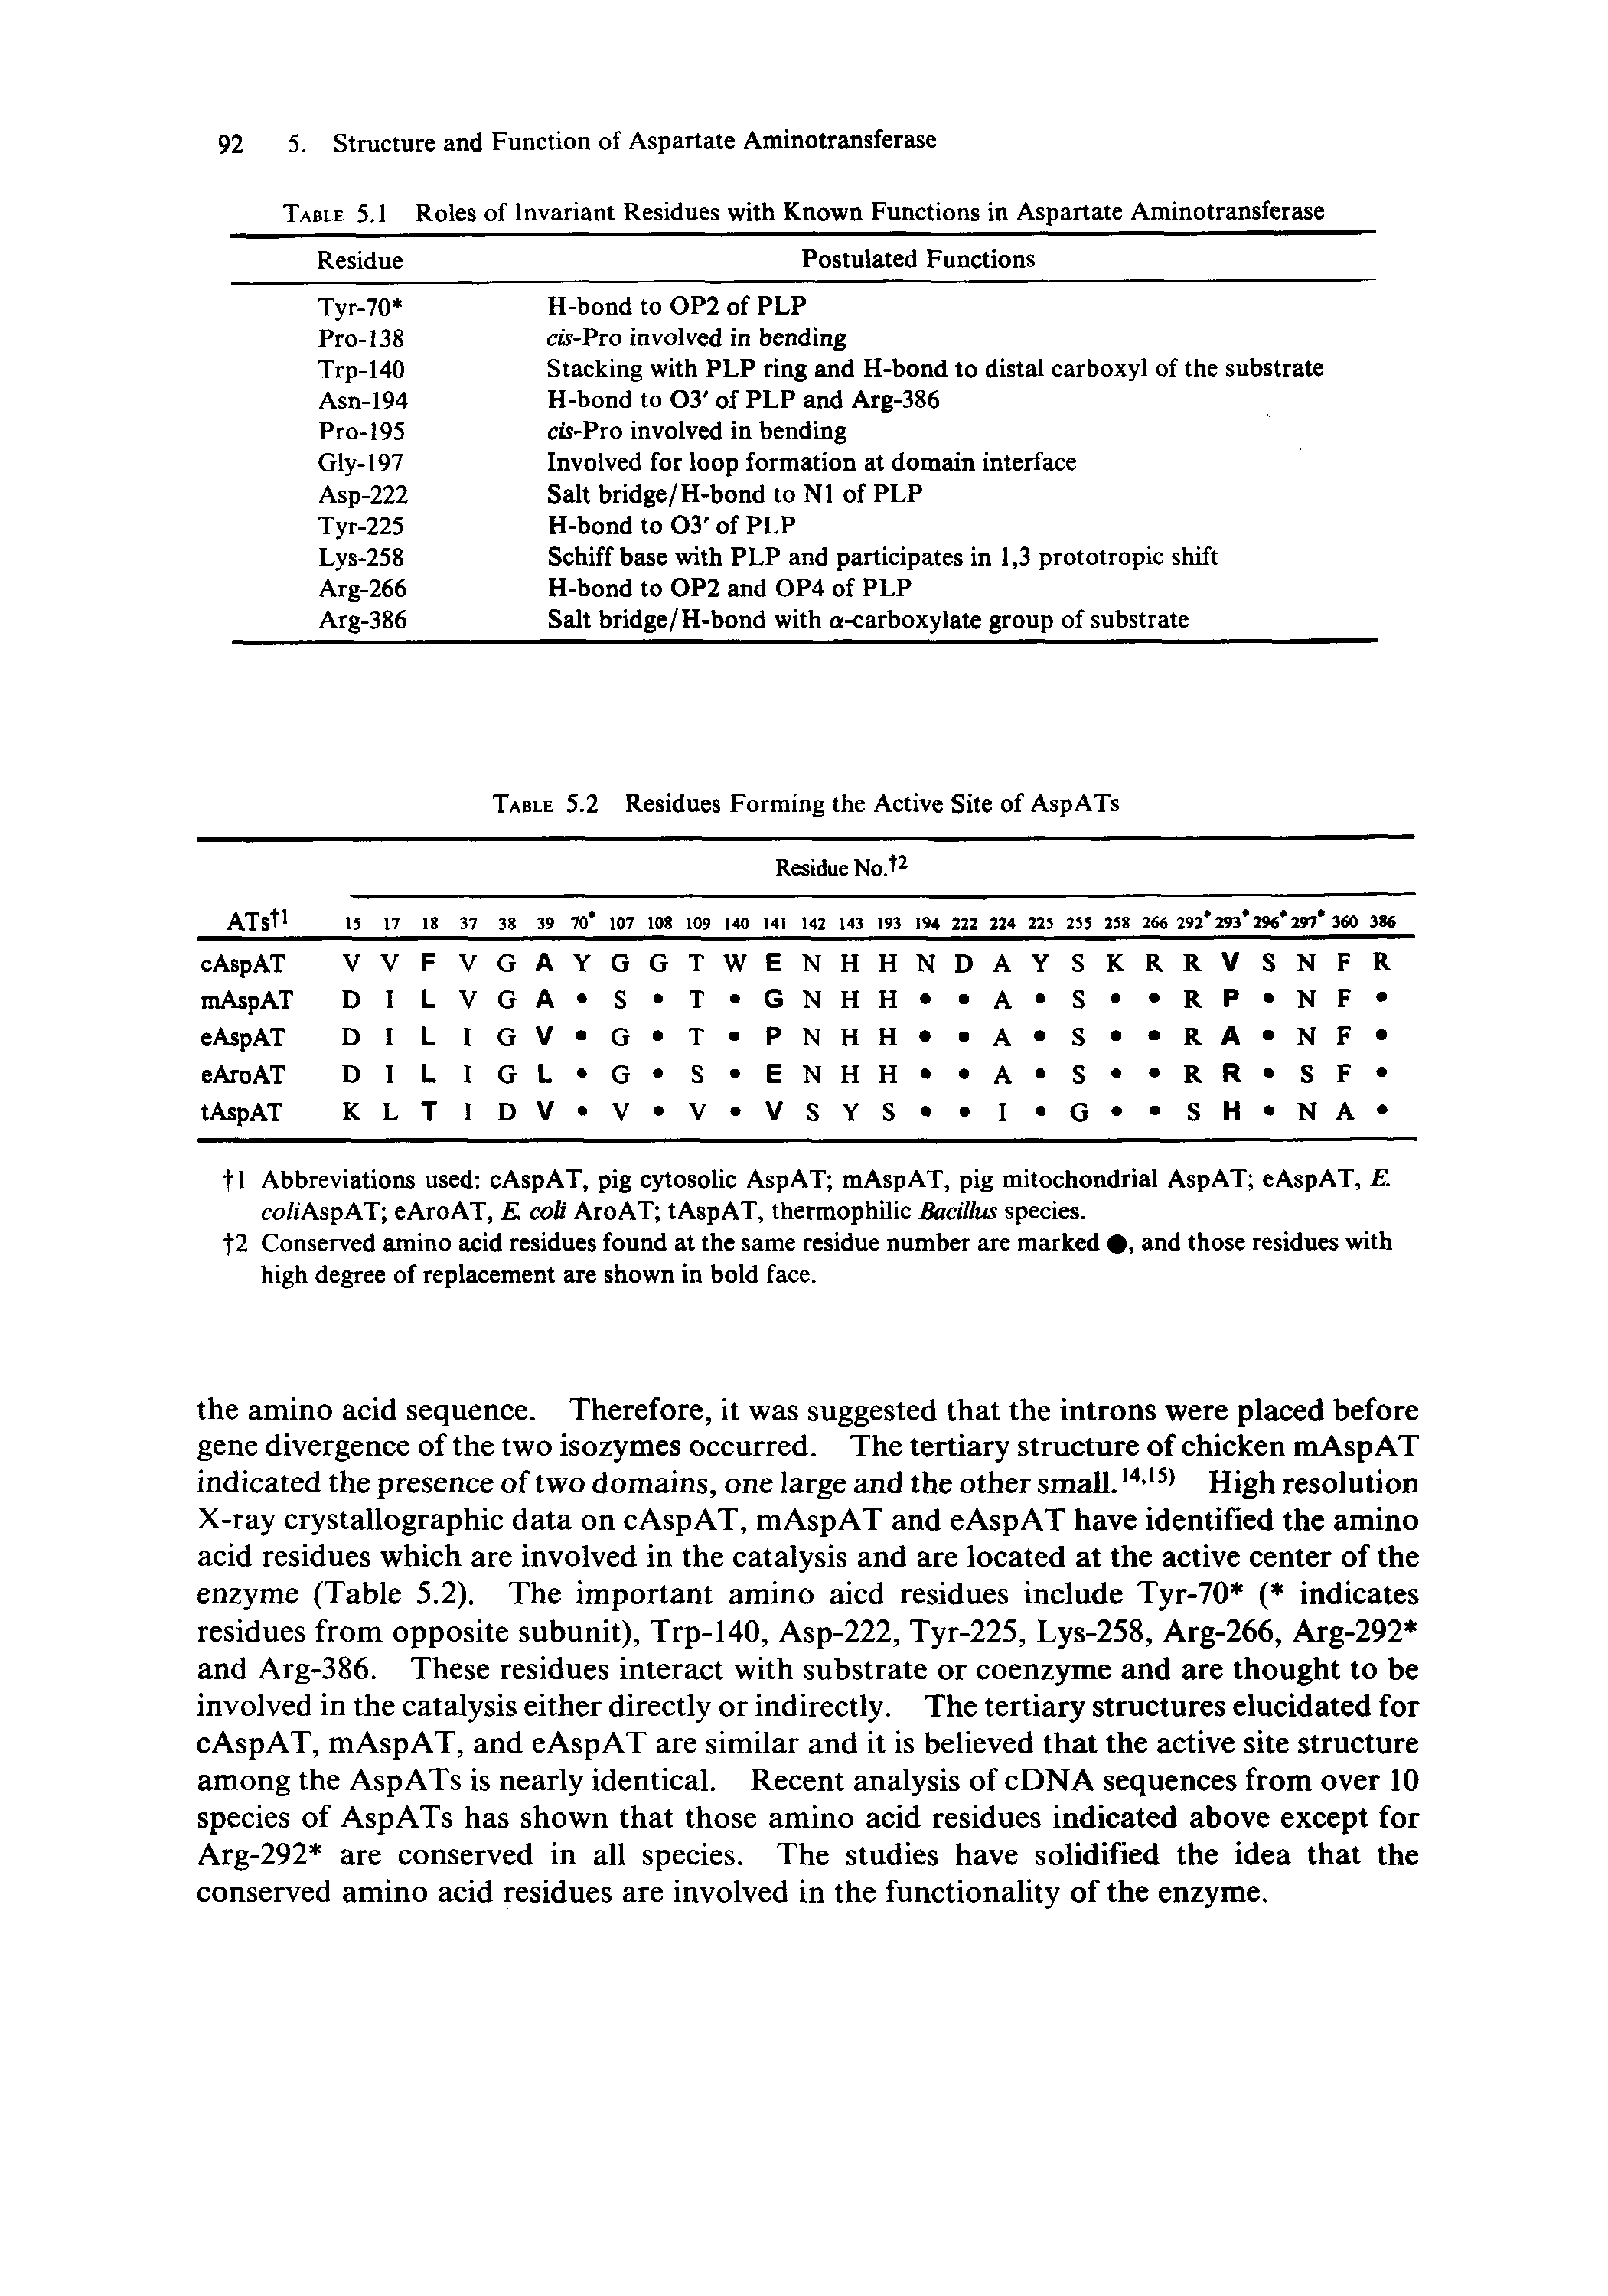 Table 5.1 Roles of Invariant Residues with Known Functions in Aspartate Aminotransferase...